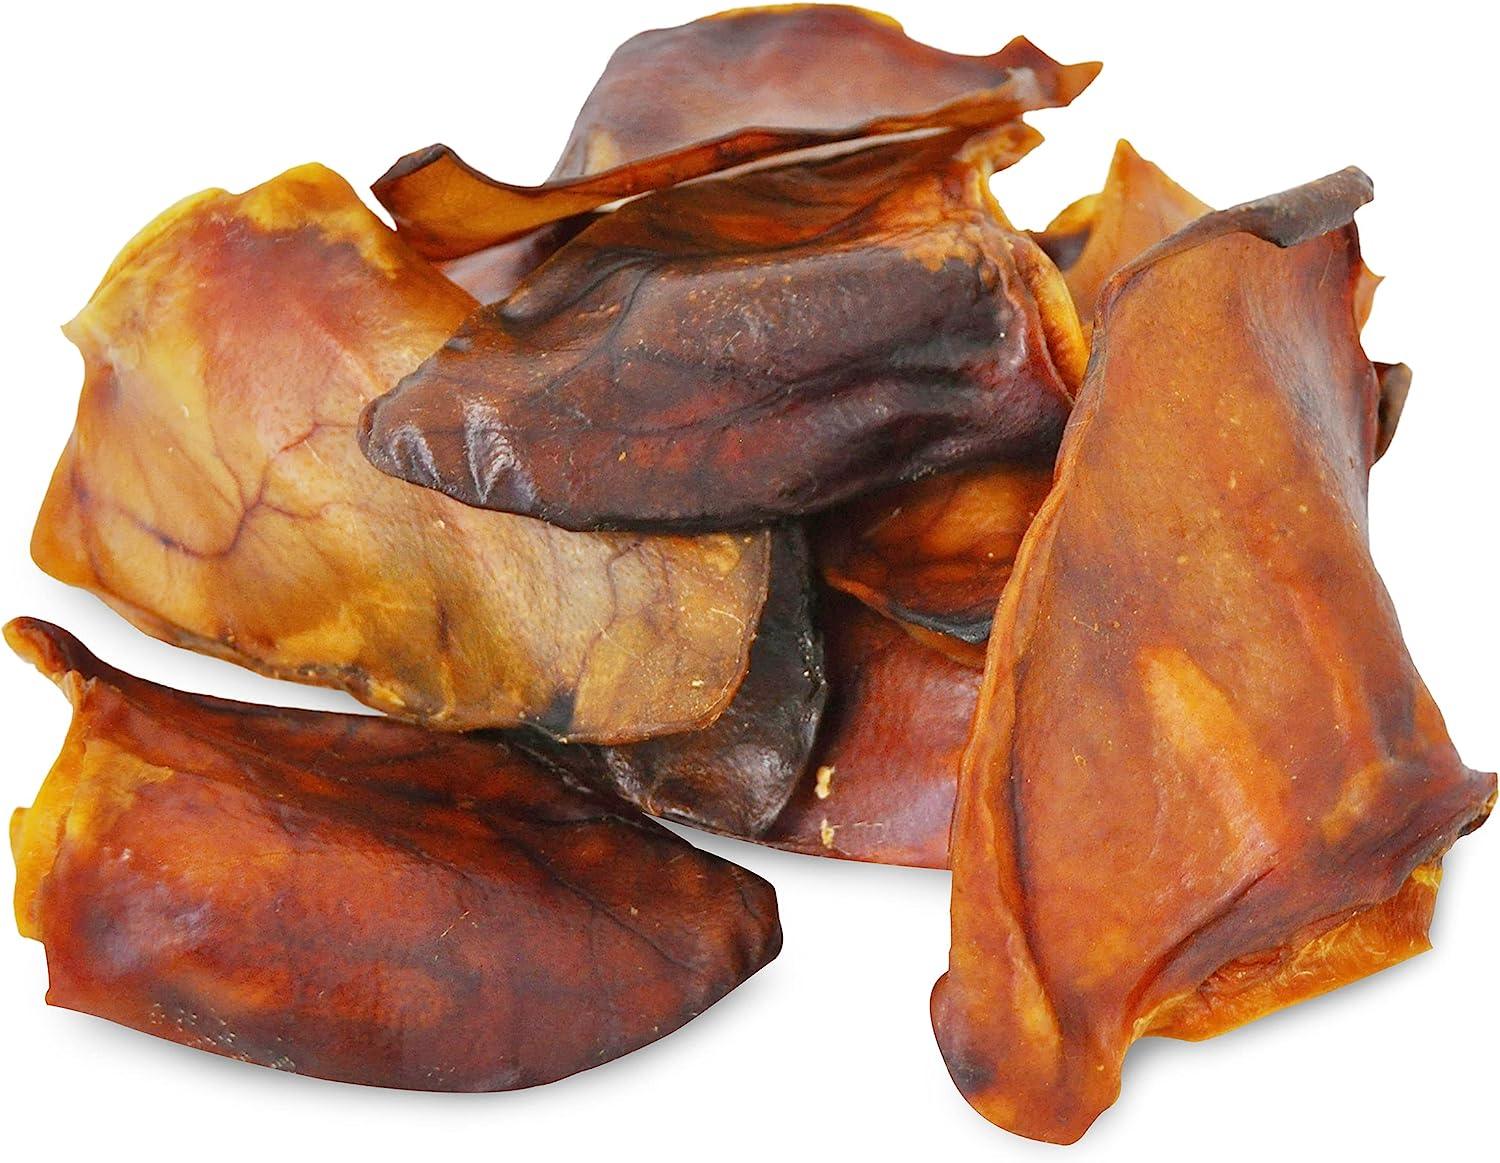 Pig Ears for Dogs - Large, Whole and Natural - Brutus & Barnaby